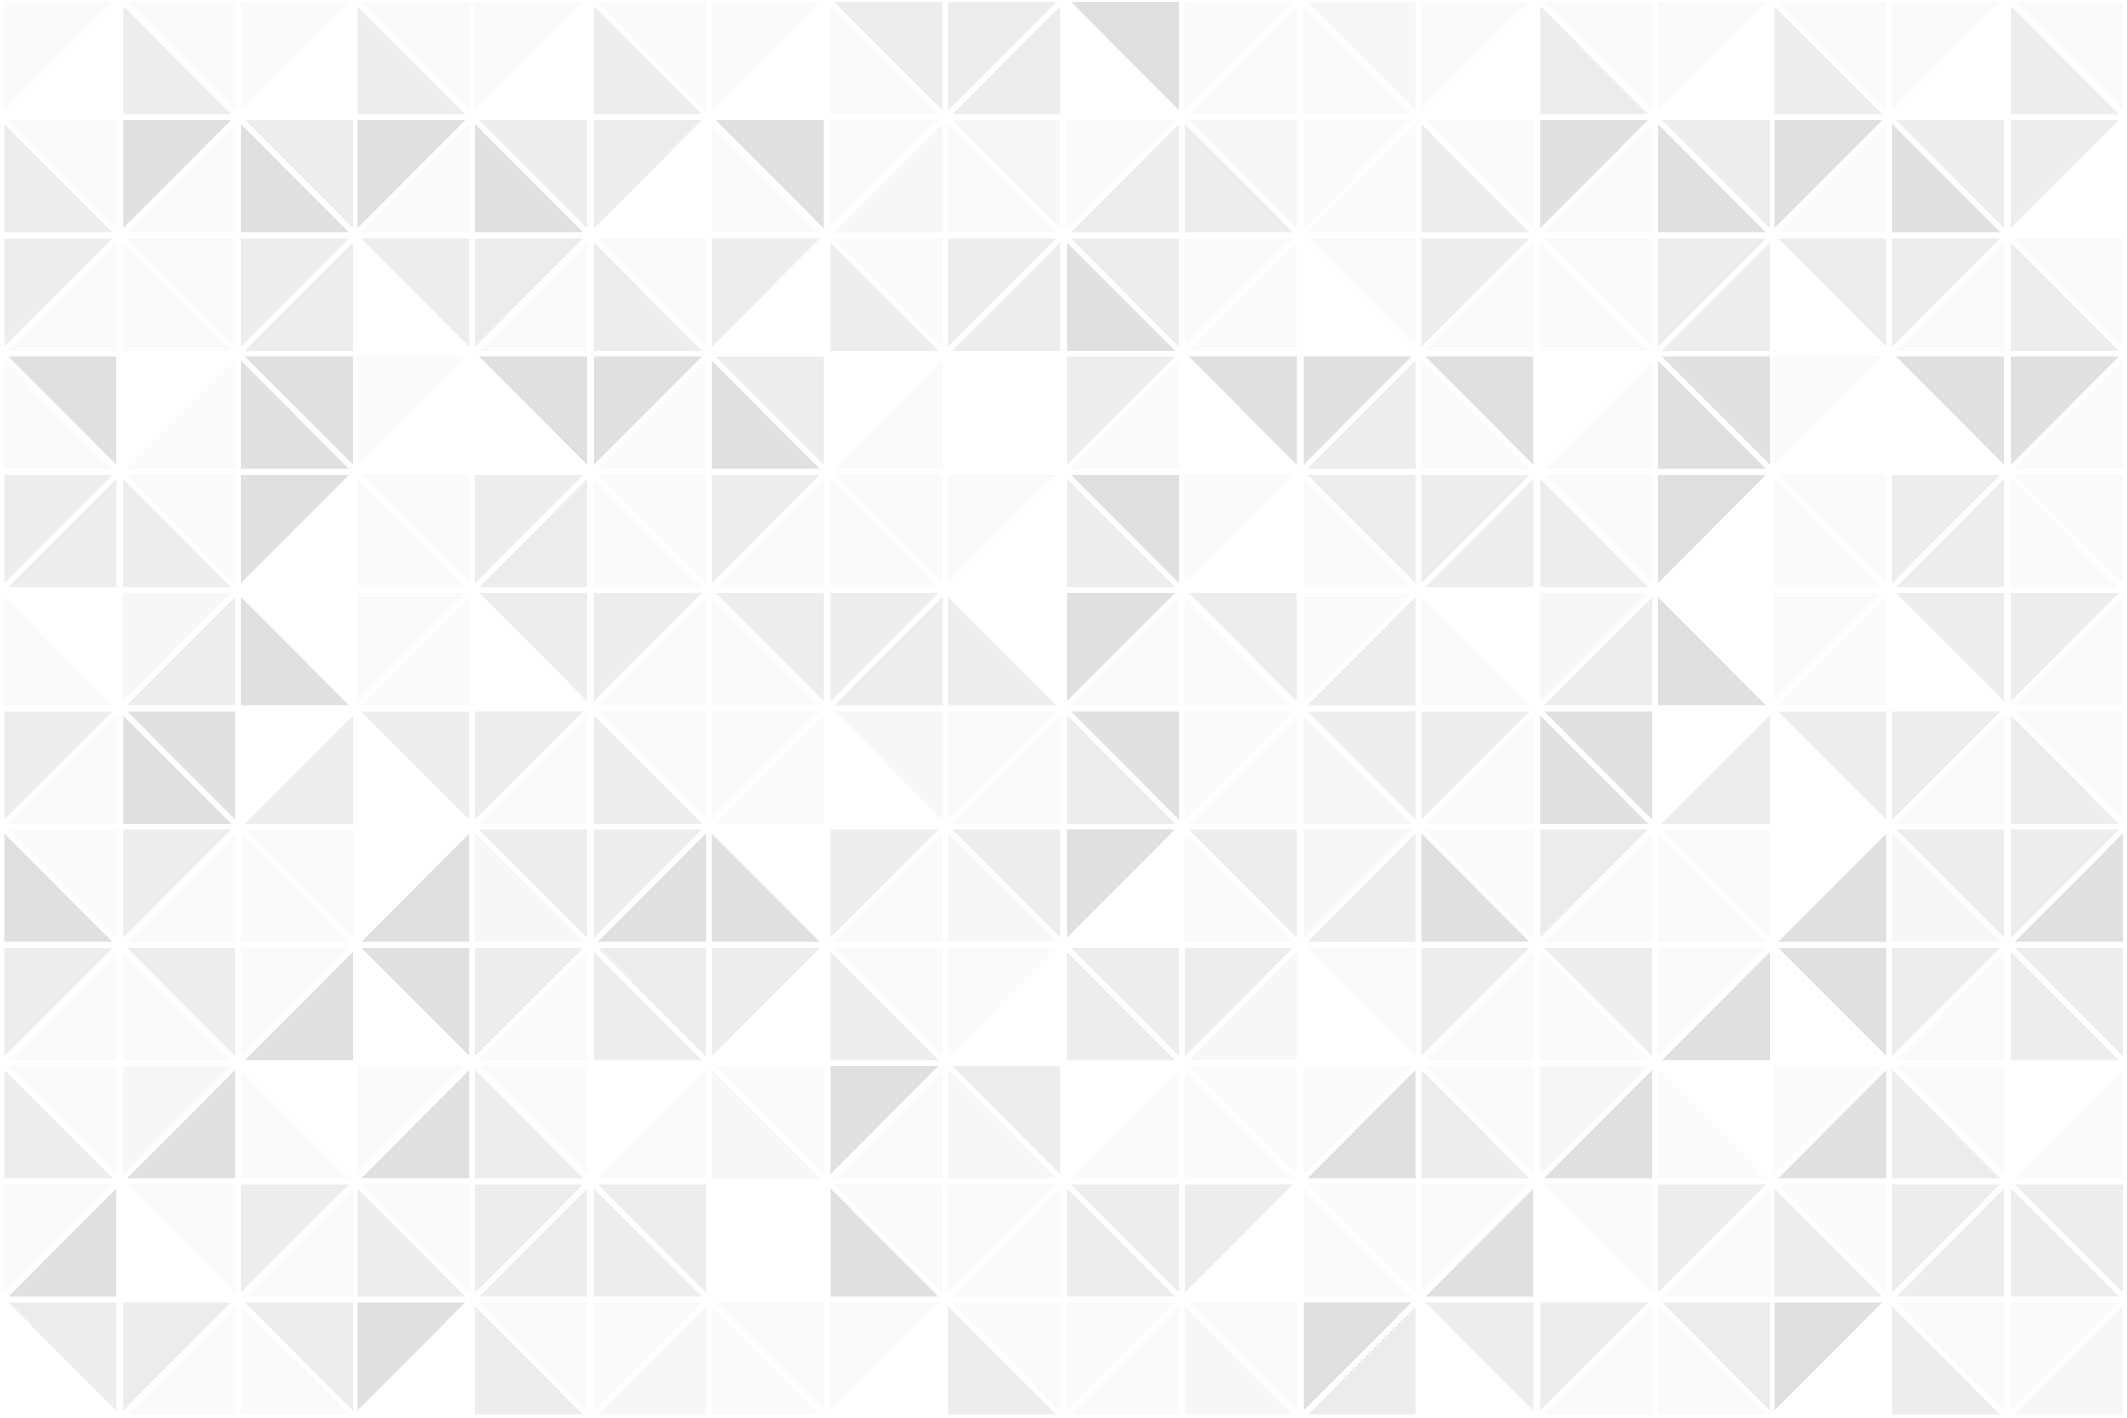 Patterned background of gray and white triangles